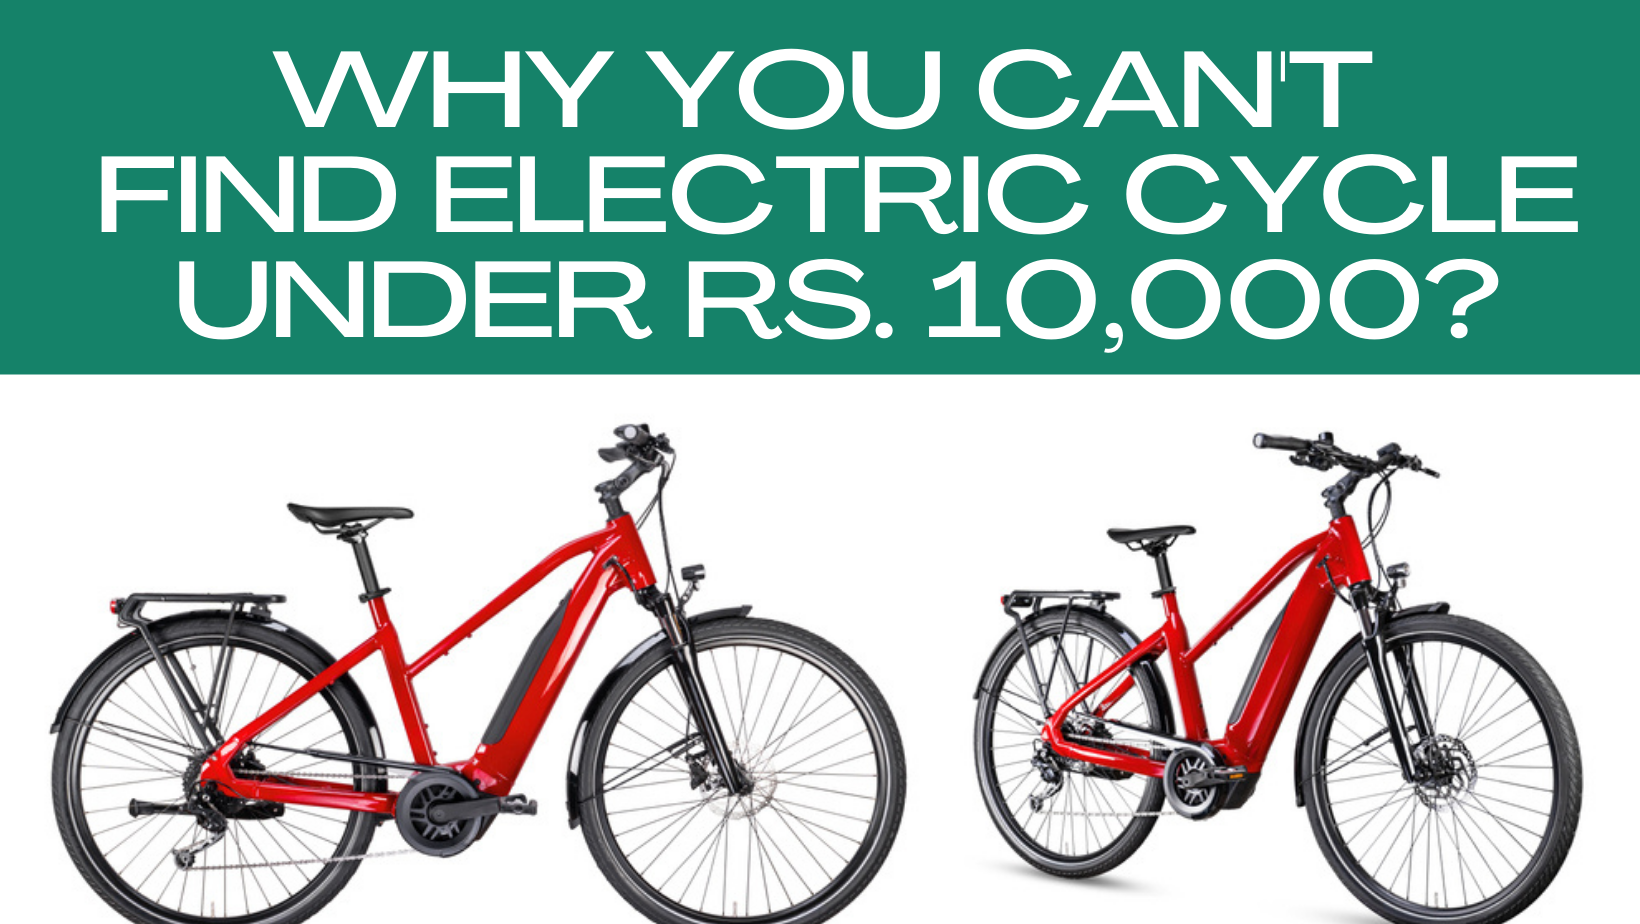 Why There are no Electric Bicycle under Rs. 10000?